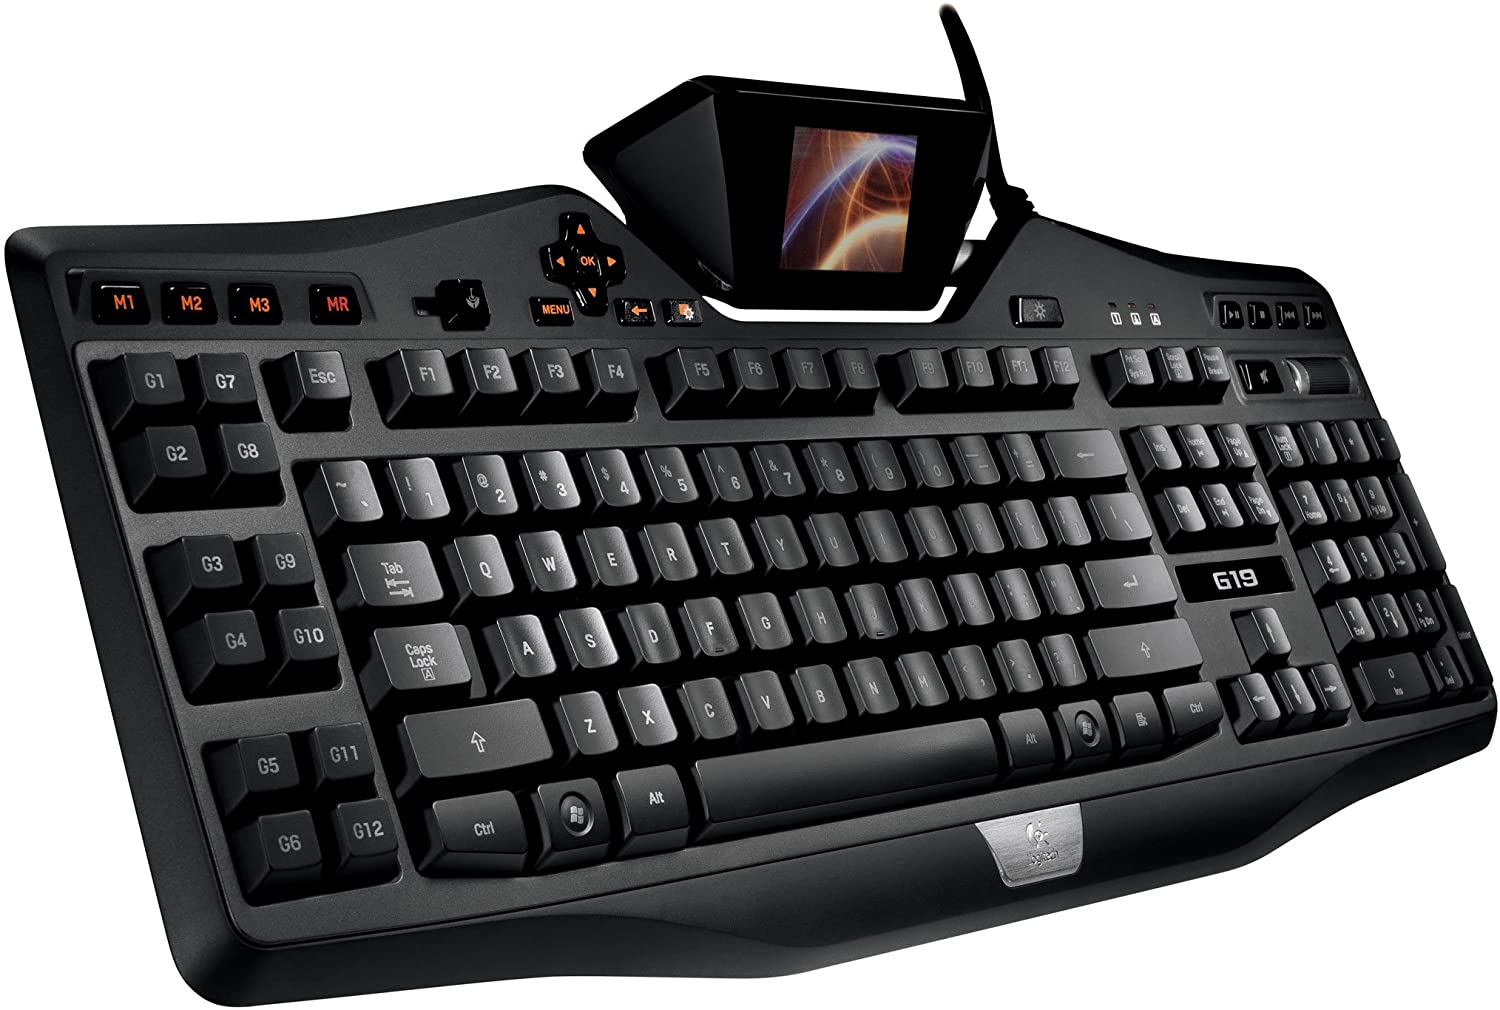 Best gaming keyboards money can buy: The G19 Gaming Keyboard